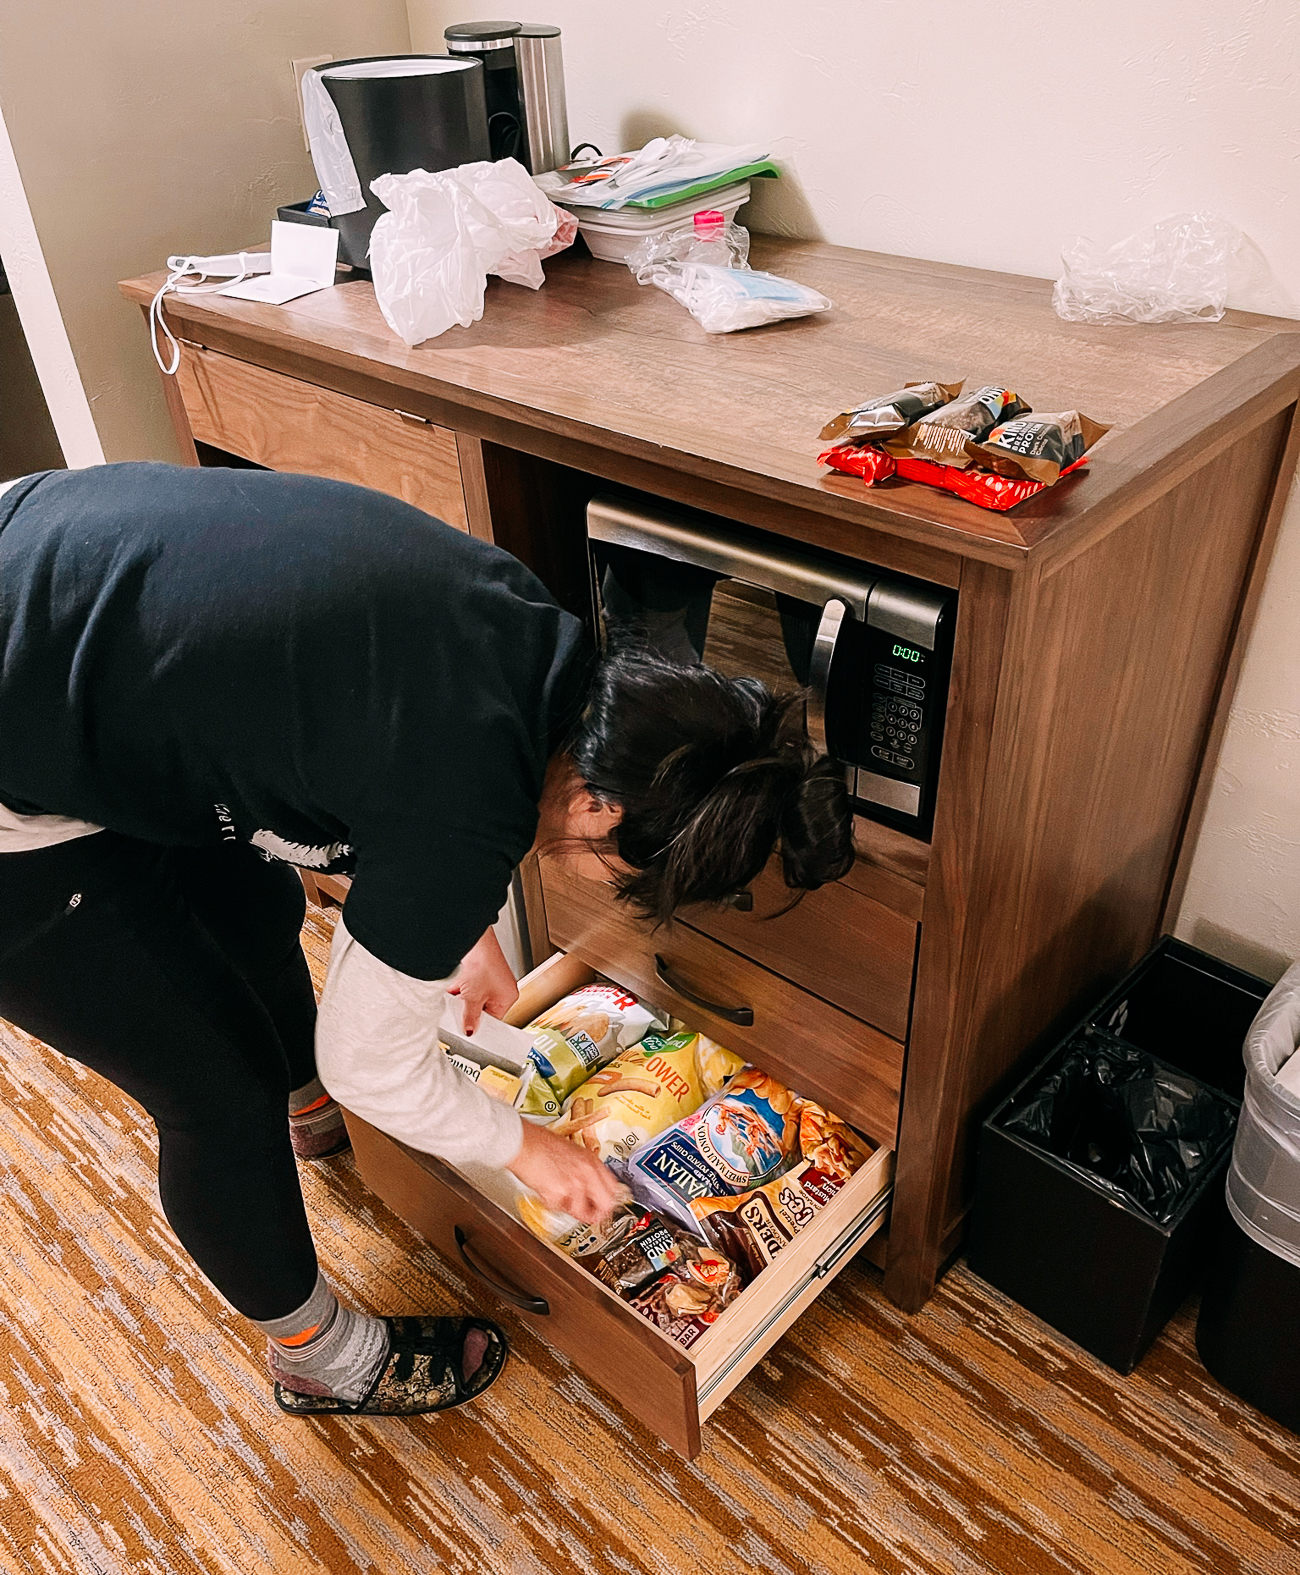 Sarah organizing the trip pantry in the hotel room